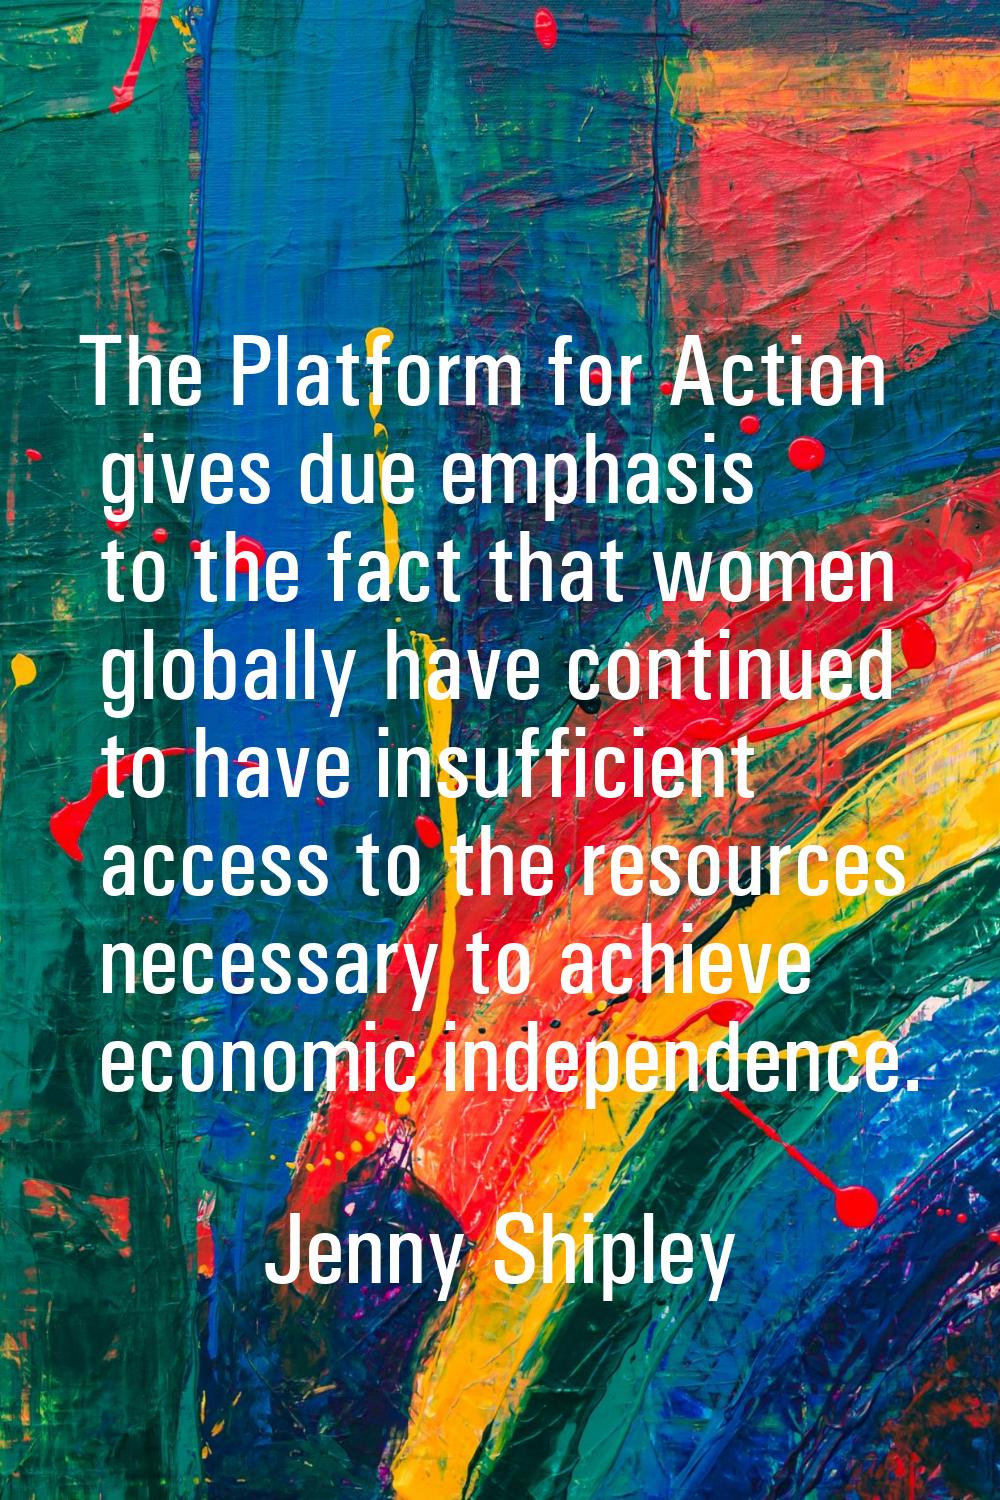 The Platform for Action gives due emphasis to the fact that women globally have continued to have i